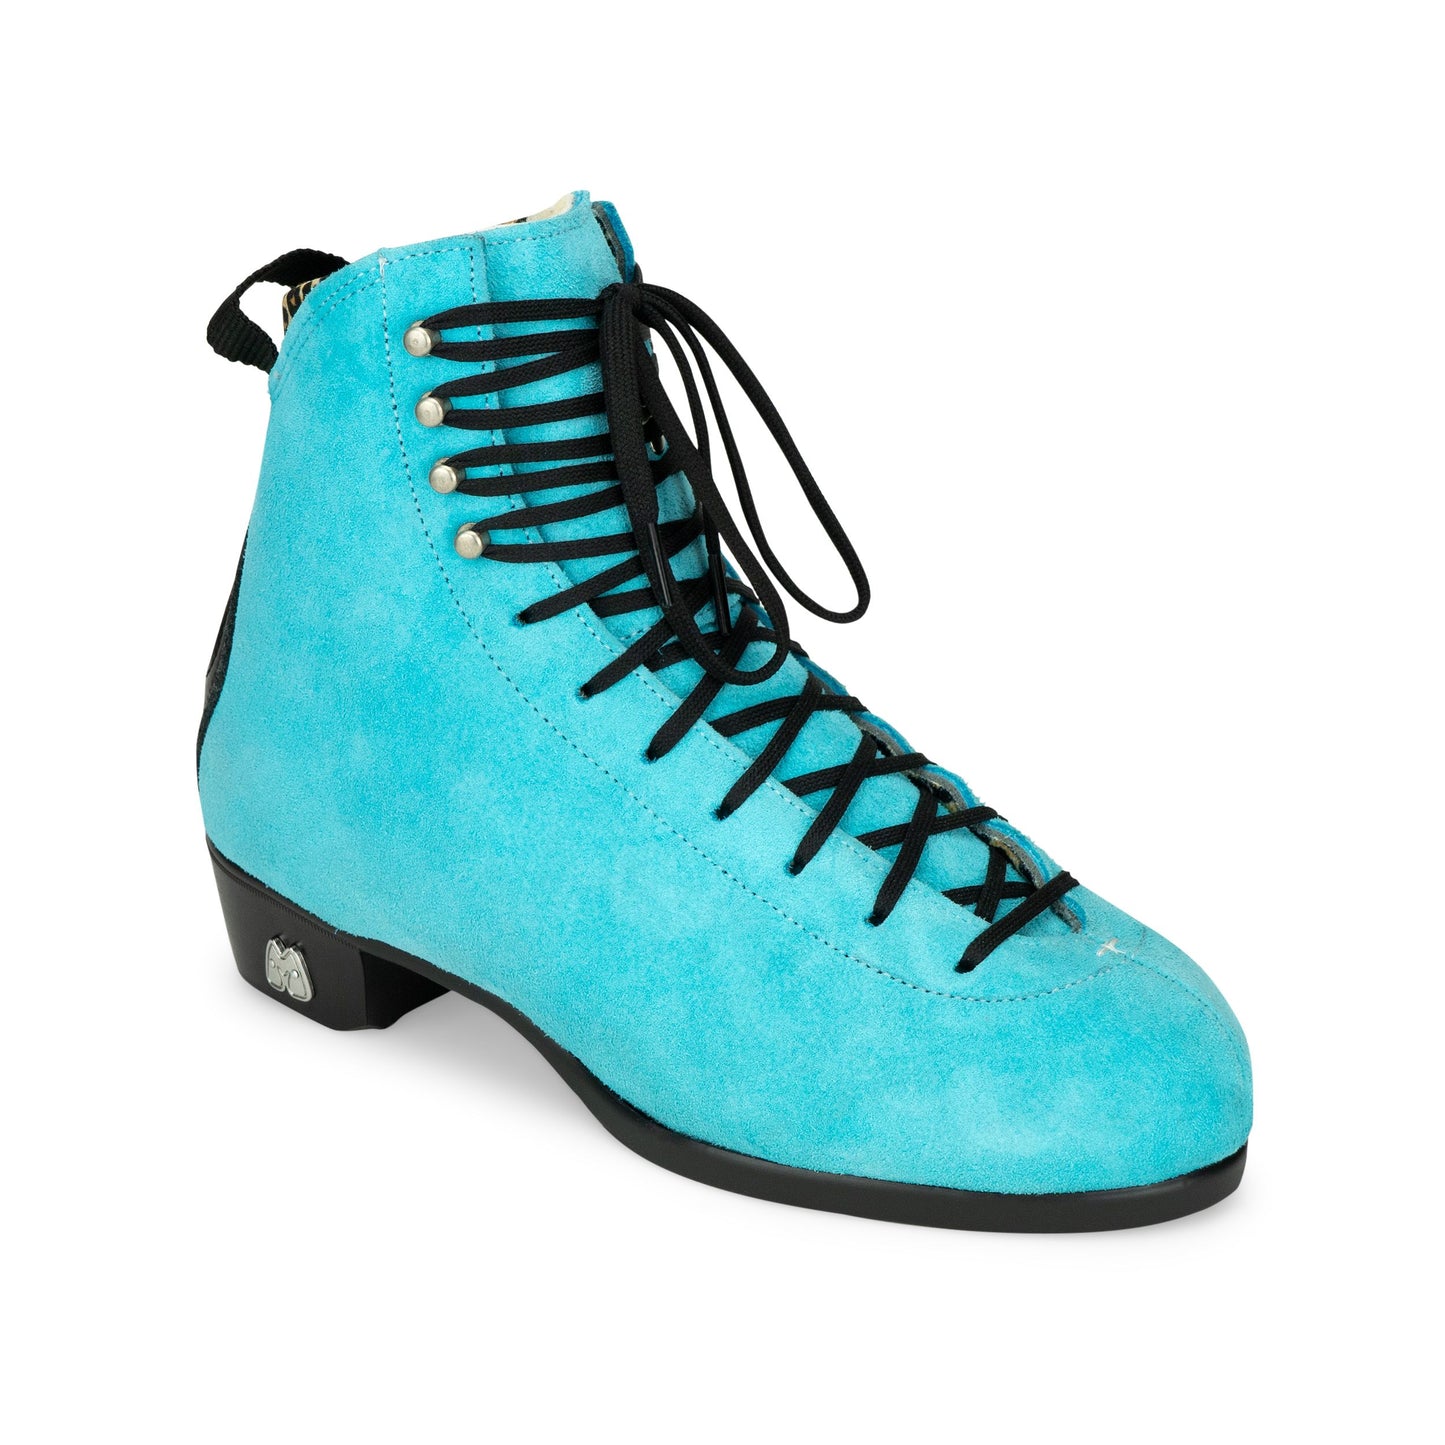 Come to Fresa's Roller Skate shop in Las Vegas and get your Moxi Skates. These Moxi Jack Roller Skates are a dream. Let us build your custom dream skate. From plates, wheels, laces, toe stops and everything in between you need to build your custom skates. You can also test your rollers skates in our indoor skate ramp.